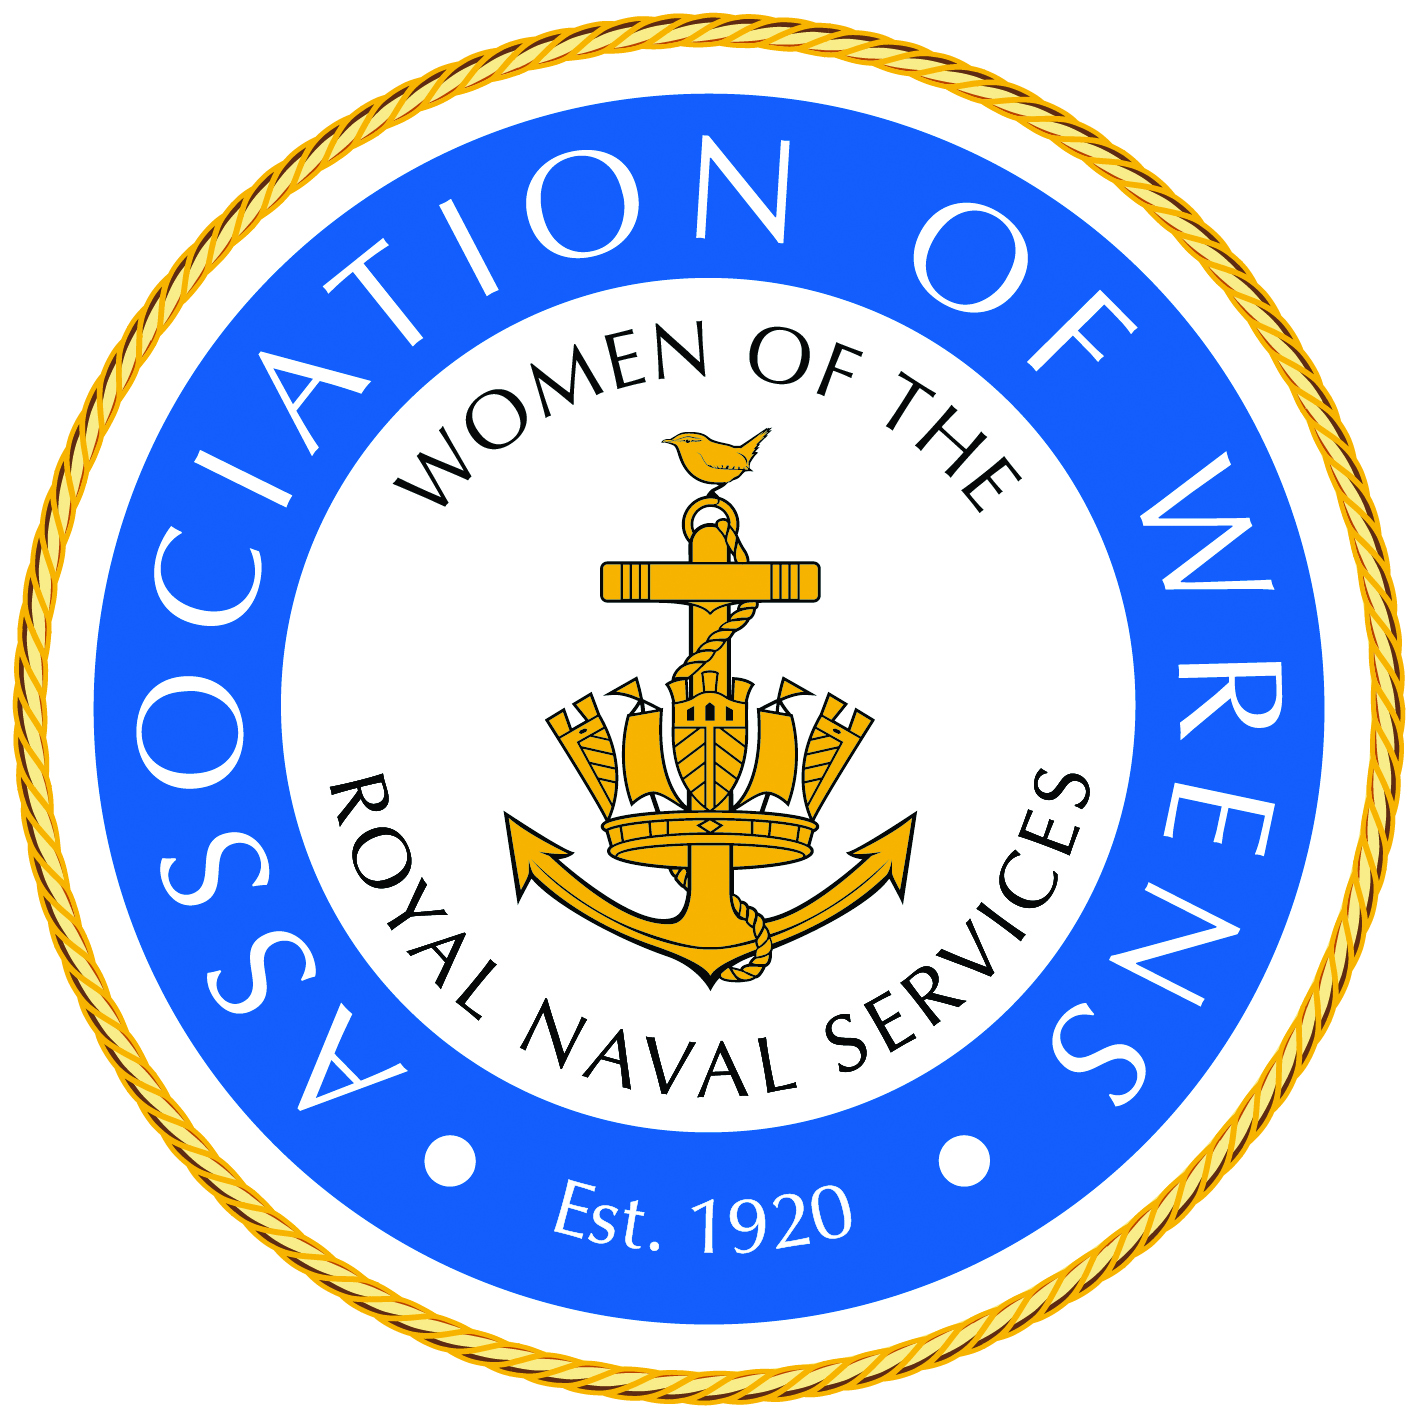 Association of Wrens and Women of the Royal Naval Services